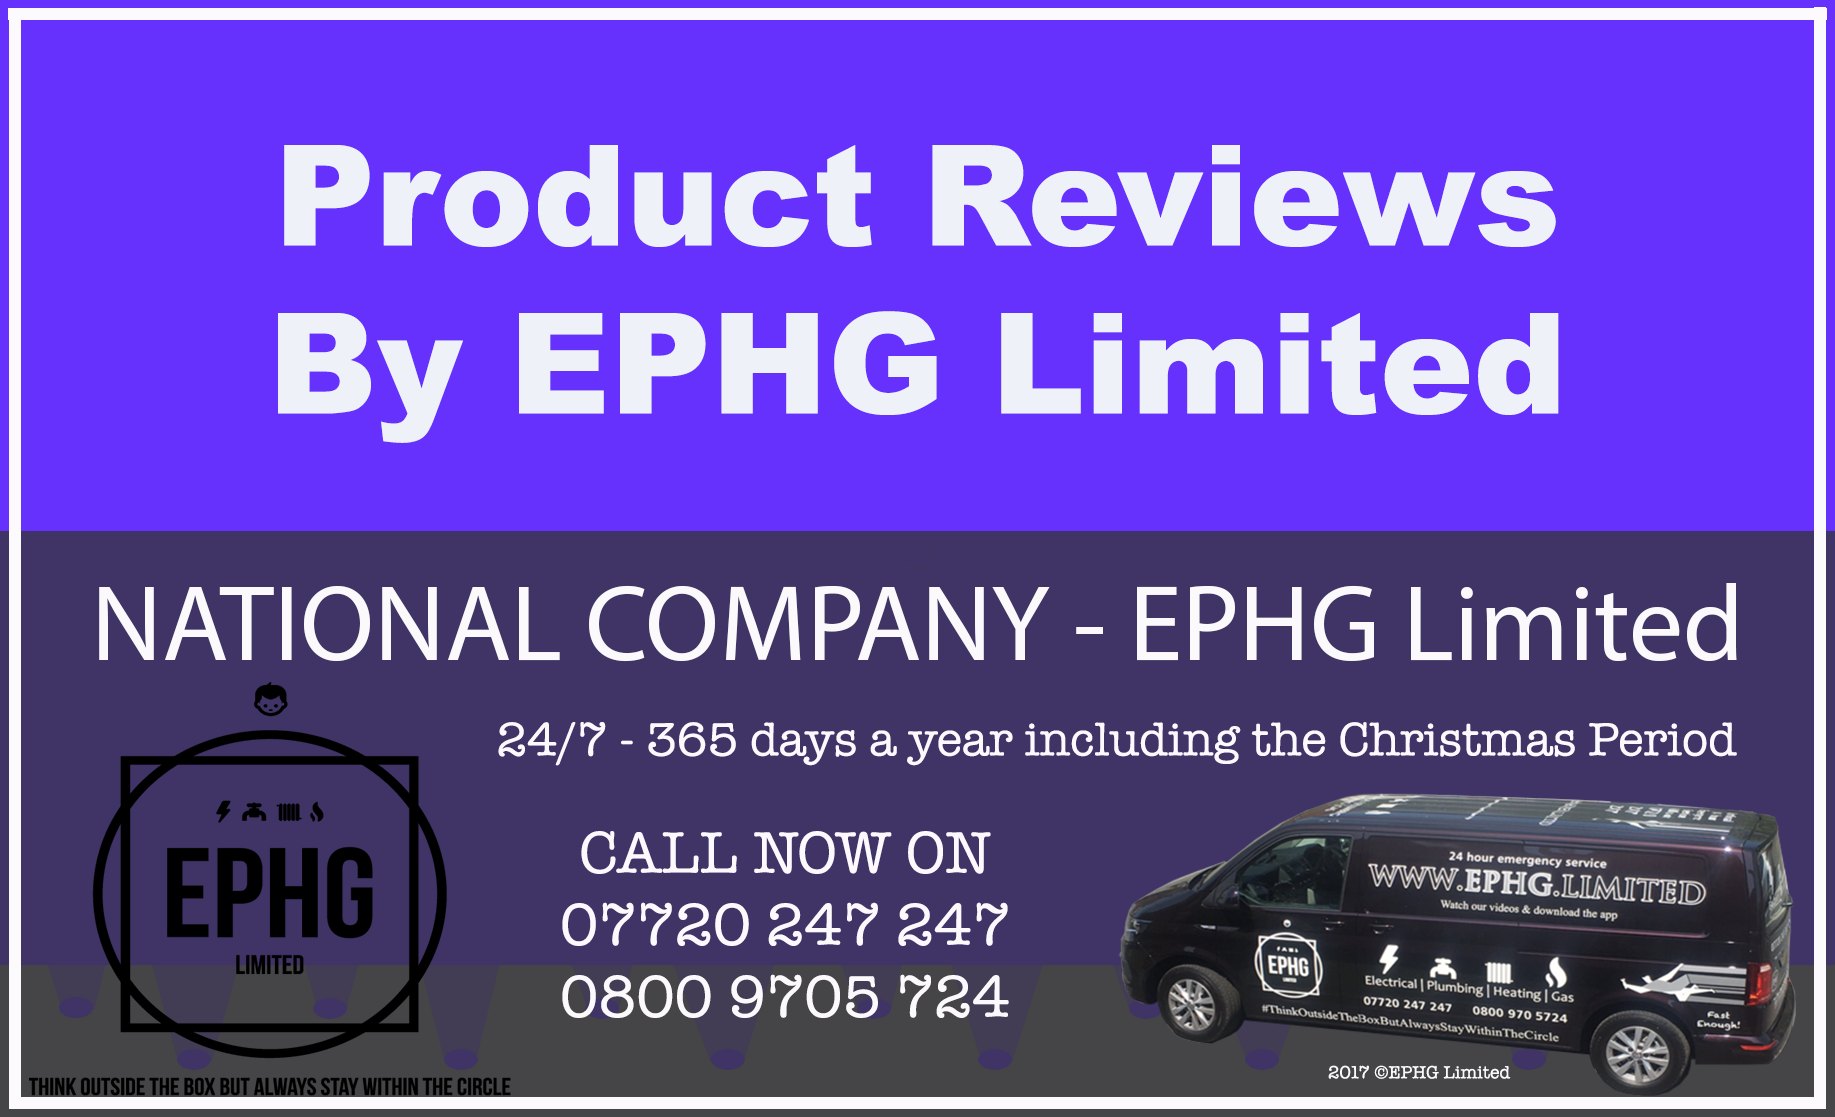 EPHG Limited Product Reviews